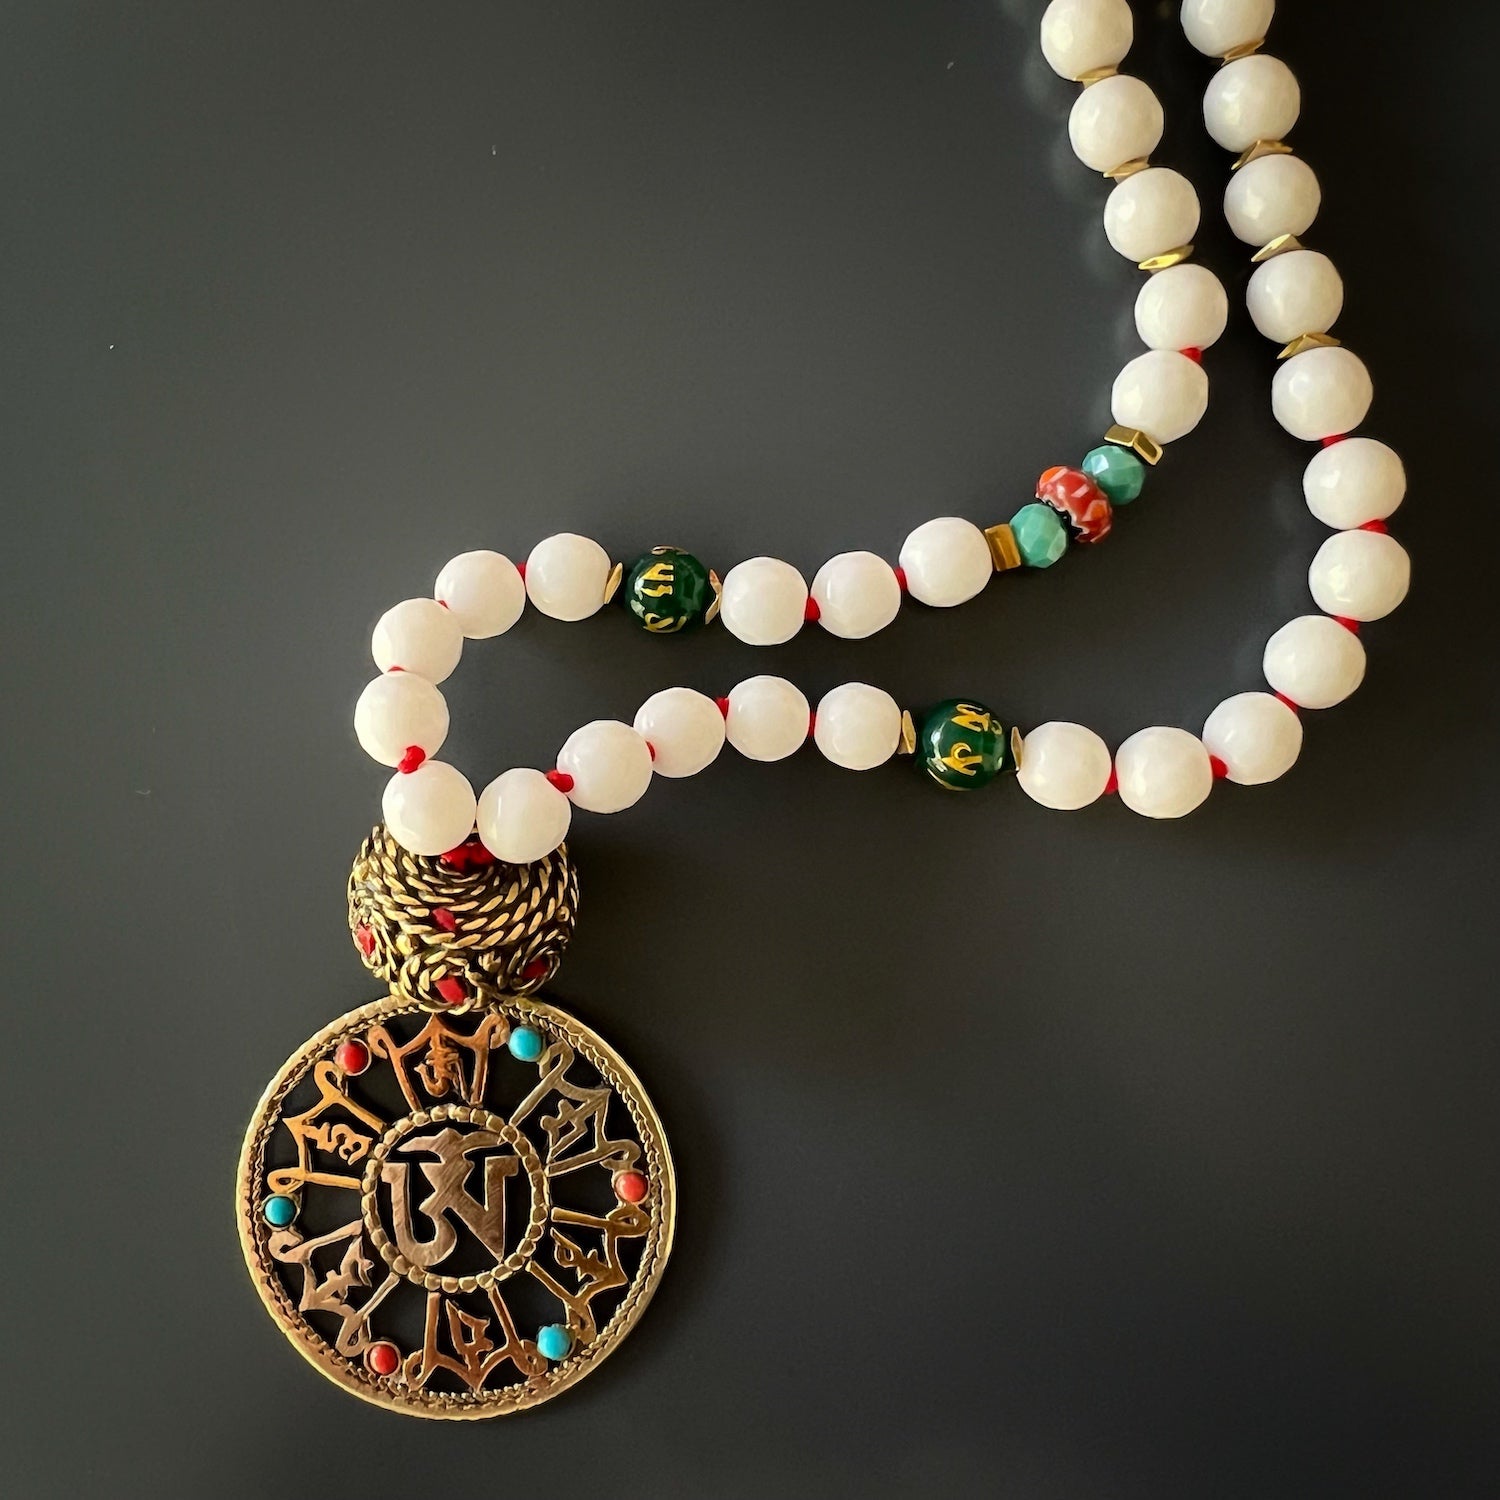 Handmade Eye Of The Buddha Necklace - Unique combination of white Jade stones, Nepal mantra beads, and a bronze Om charm for a meaningful accessory.